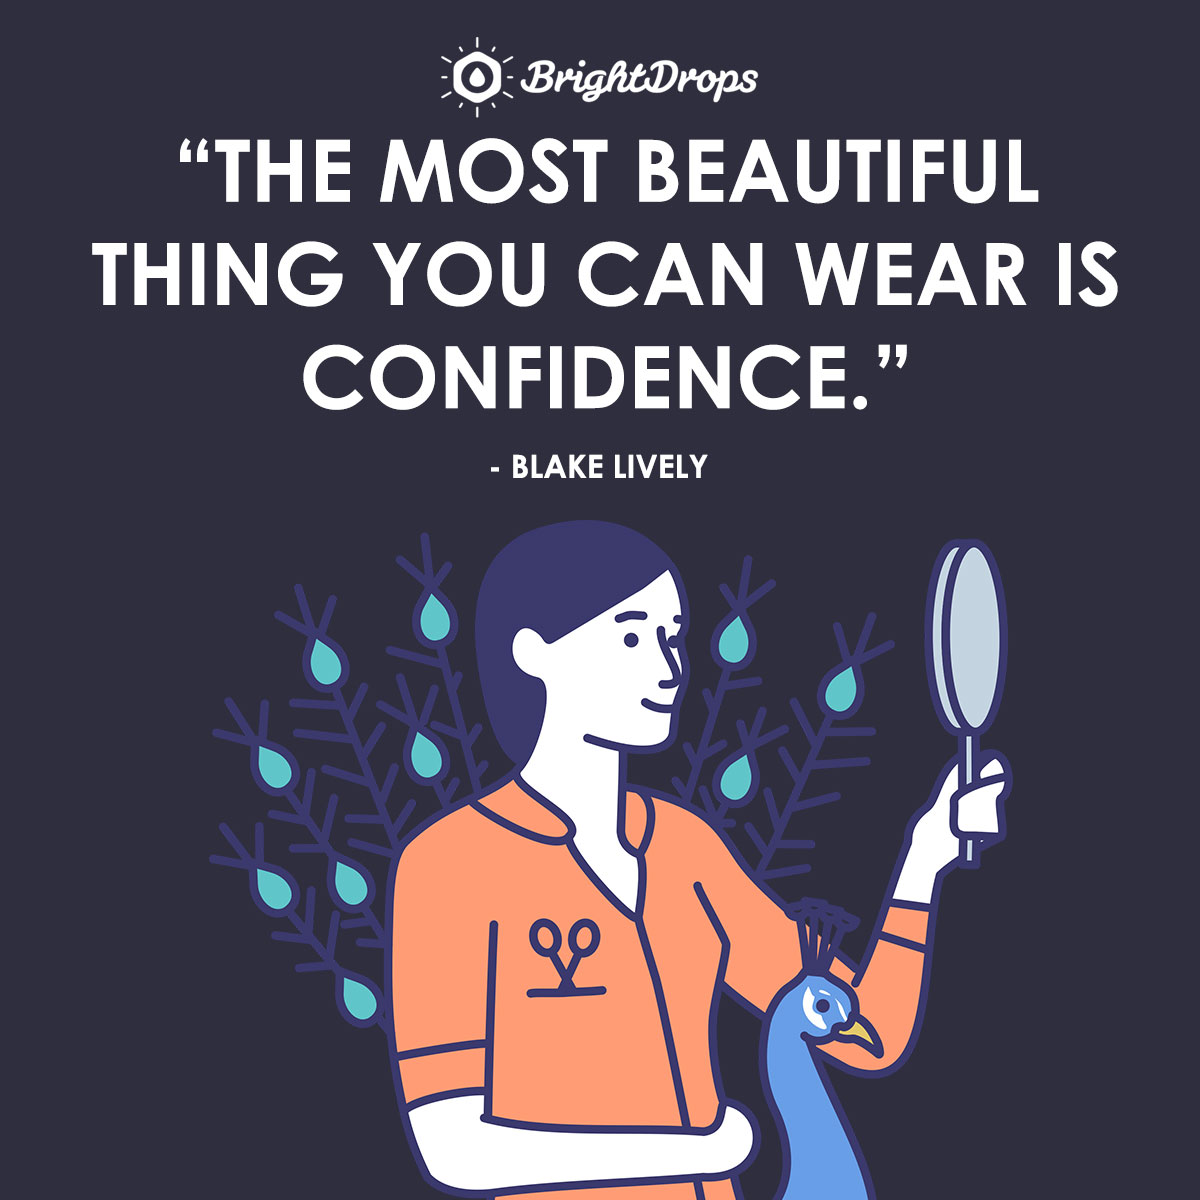 The most beautiful thing you can wear is confidence. - Blake Lively